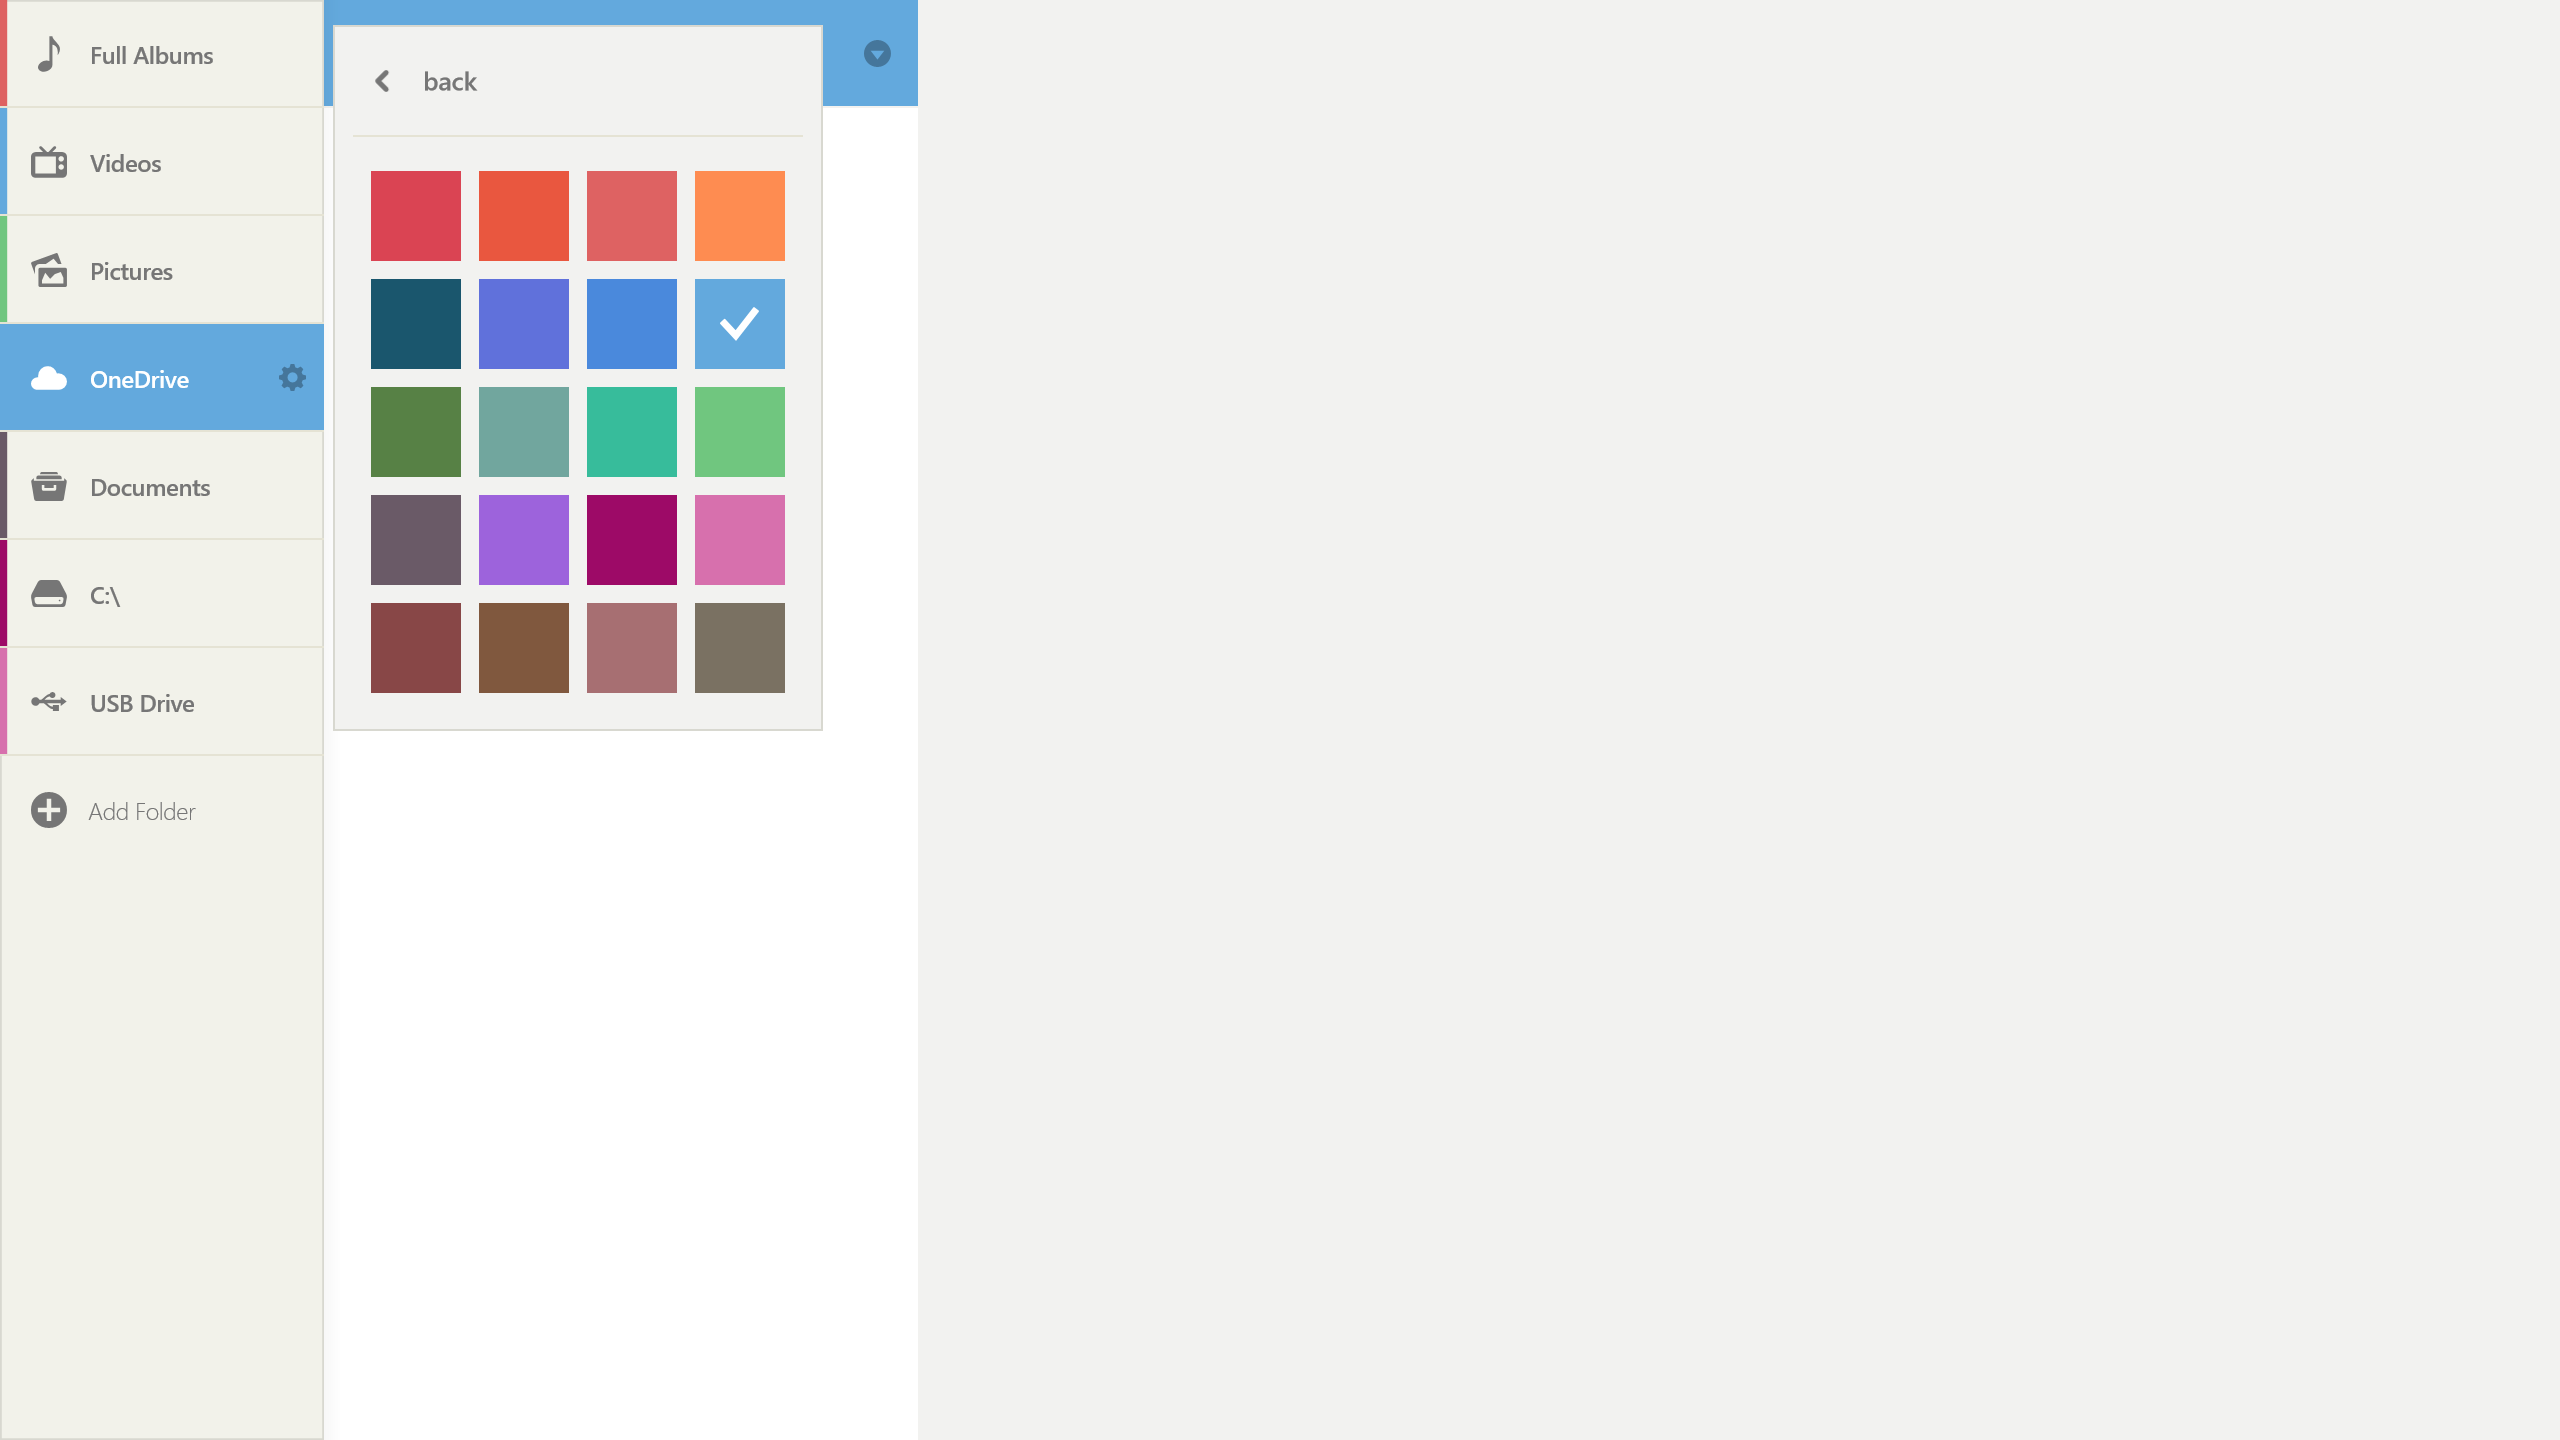 Customize your library with colors